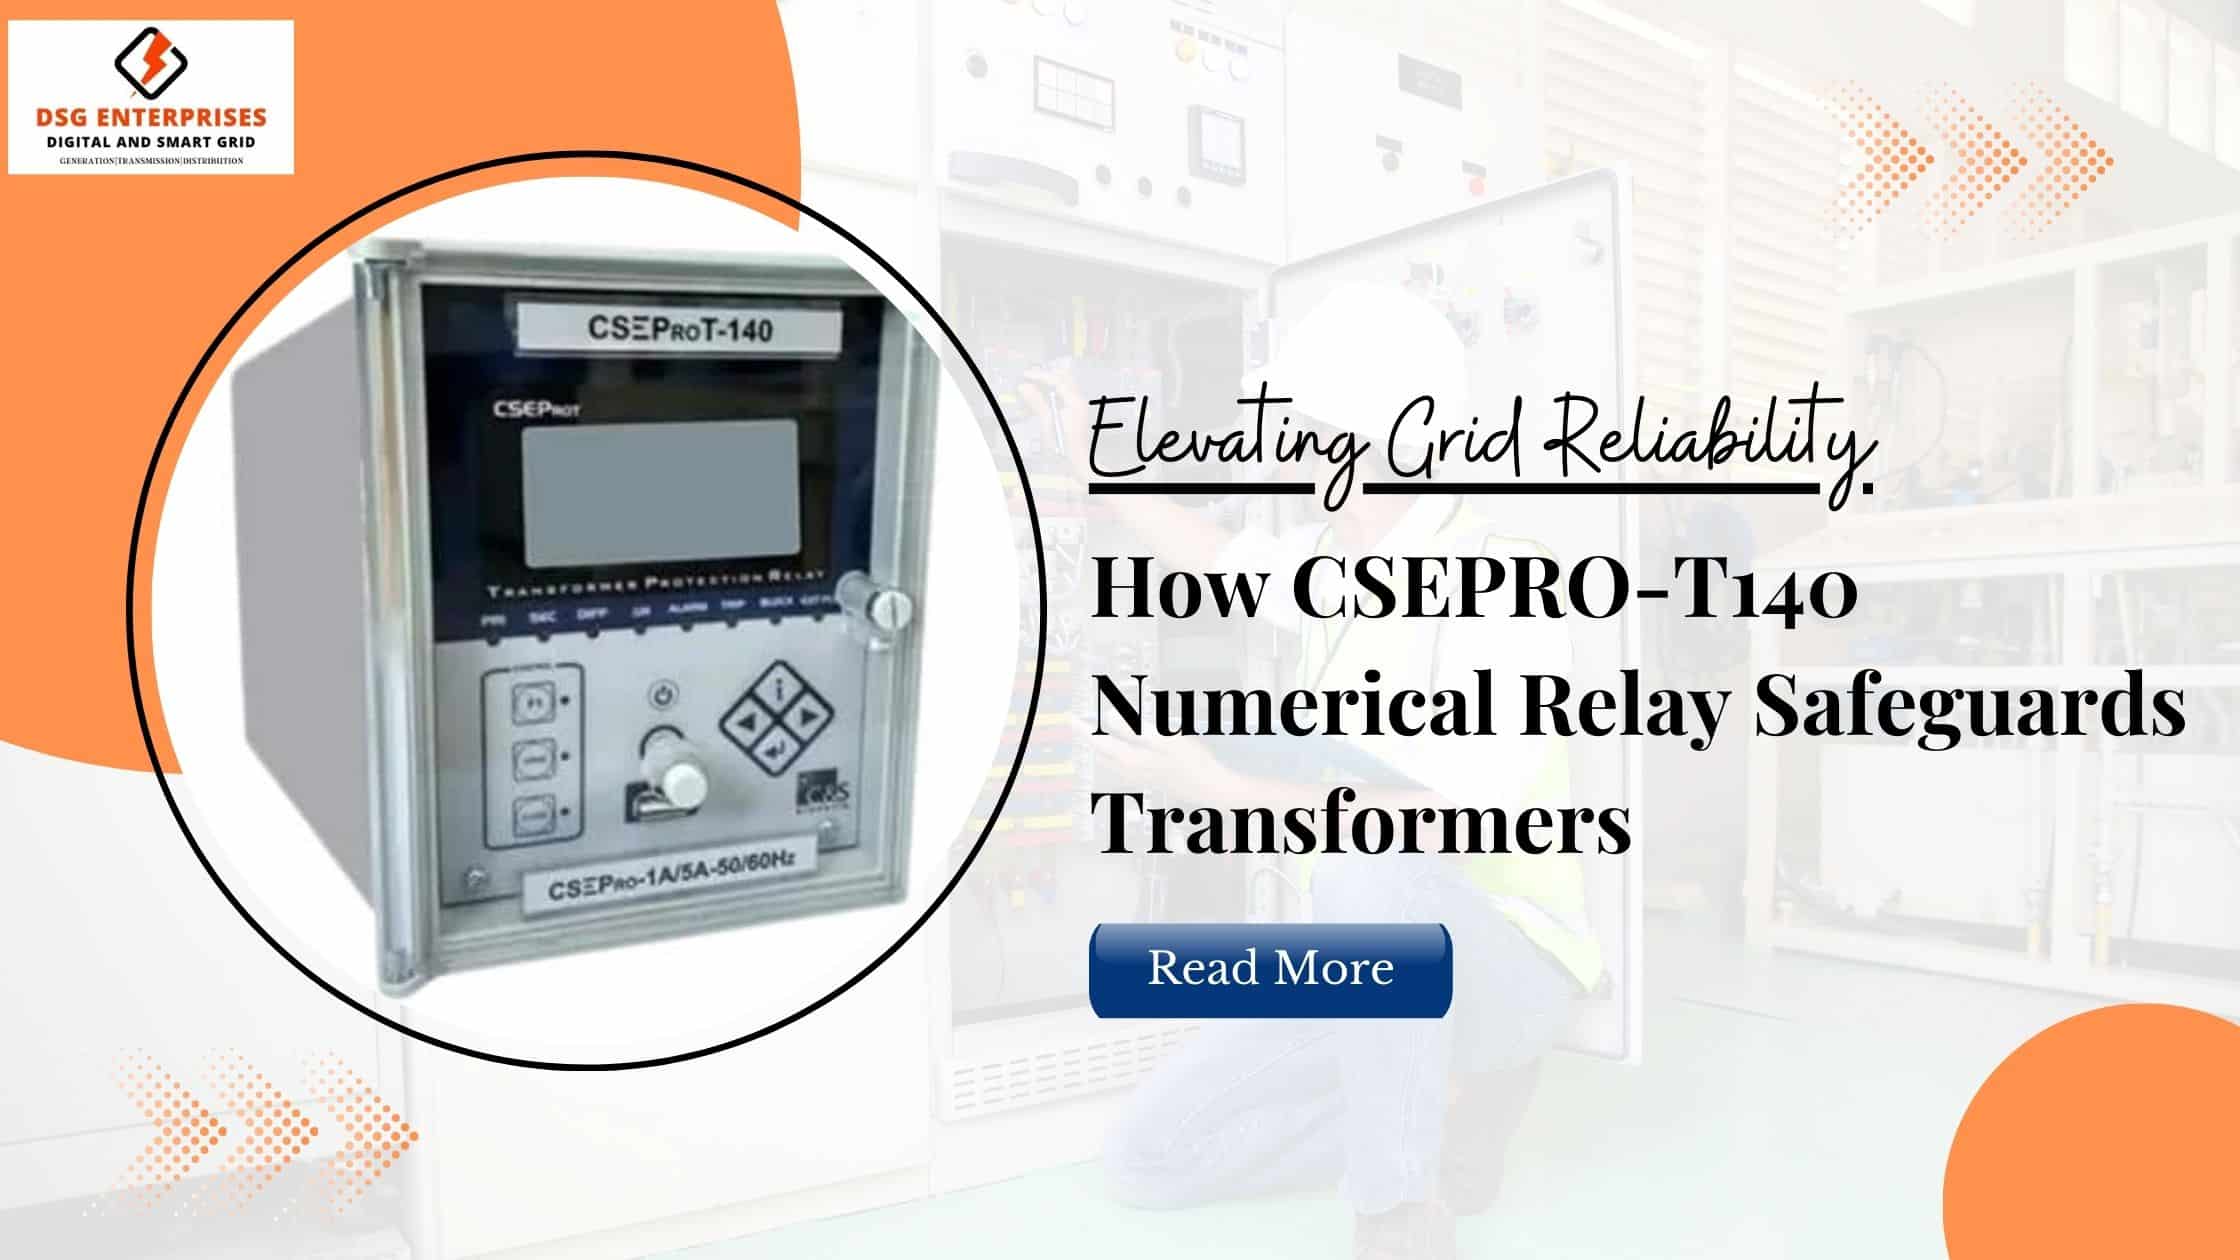 You are currently viewing Elevating Grid Reliability: How CSEPRO-T140 Numerical Relay Safeguards Transformers